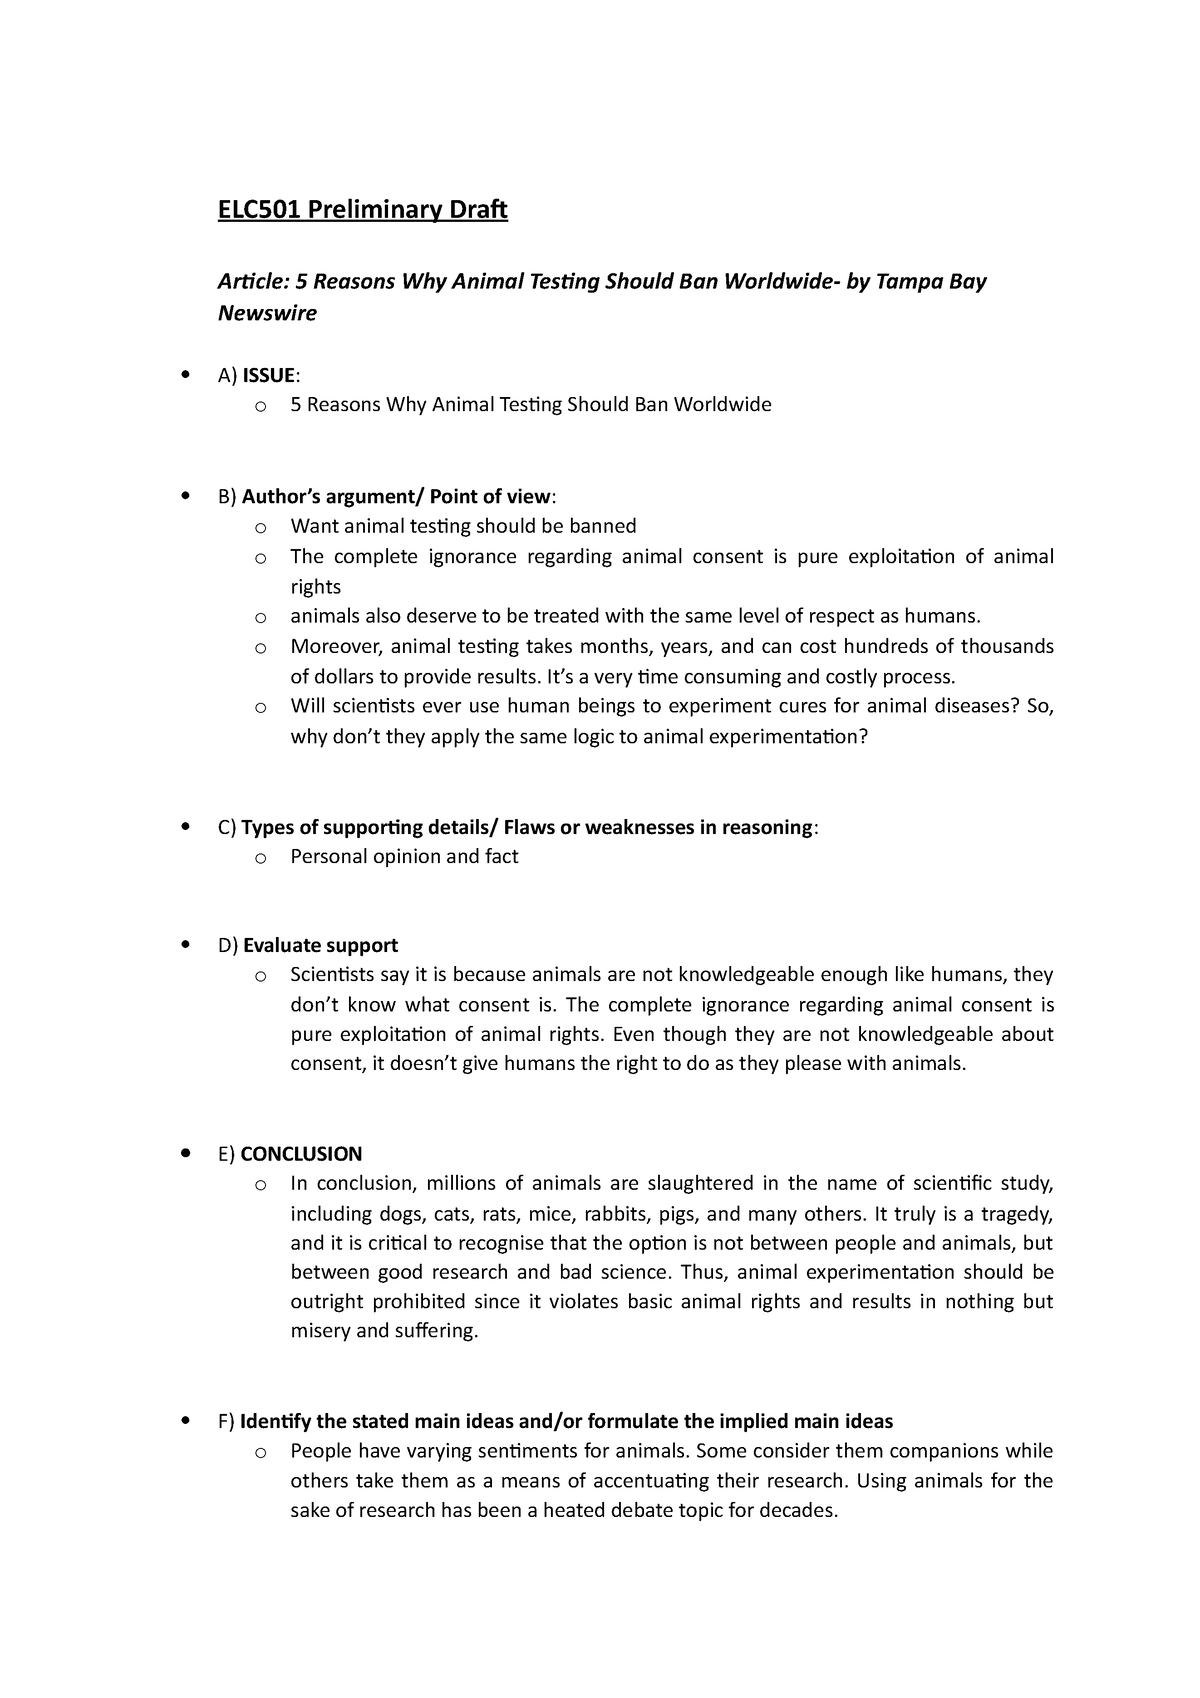 ELC501 Group Assignment Draft - ELC501 Preliminary Draf Article: 5 Reasons  Why Animal Testing Should - Studocu